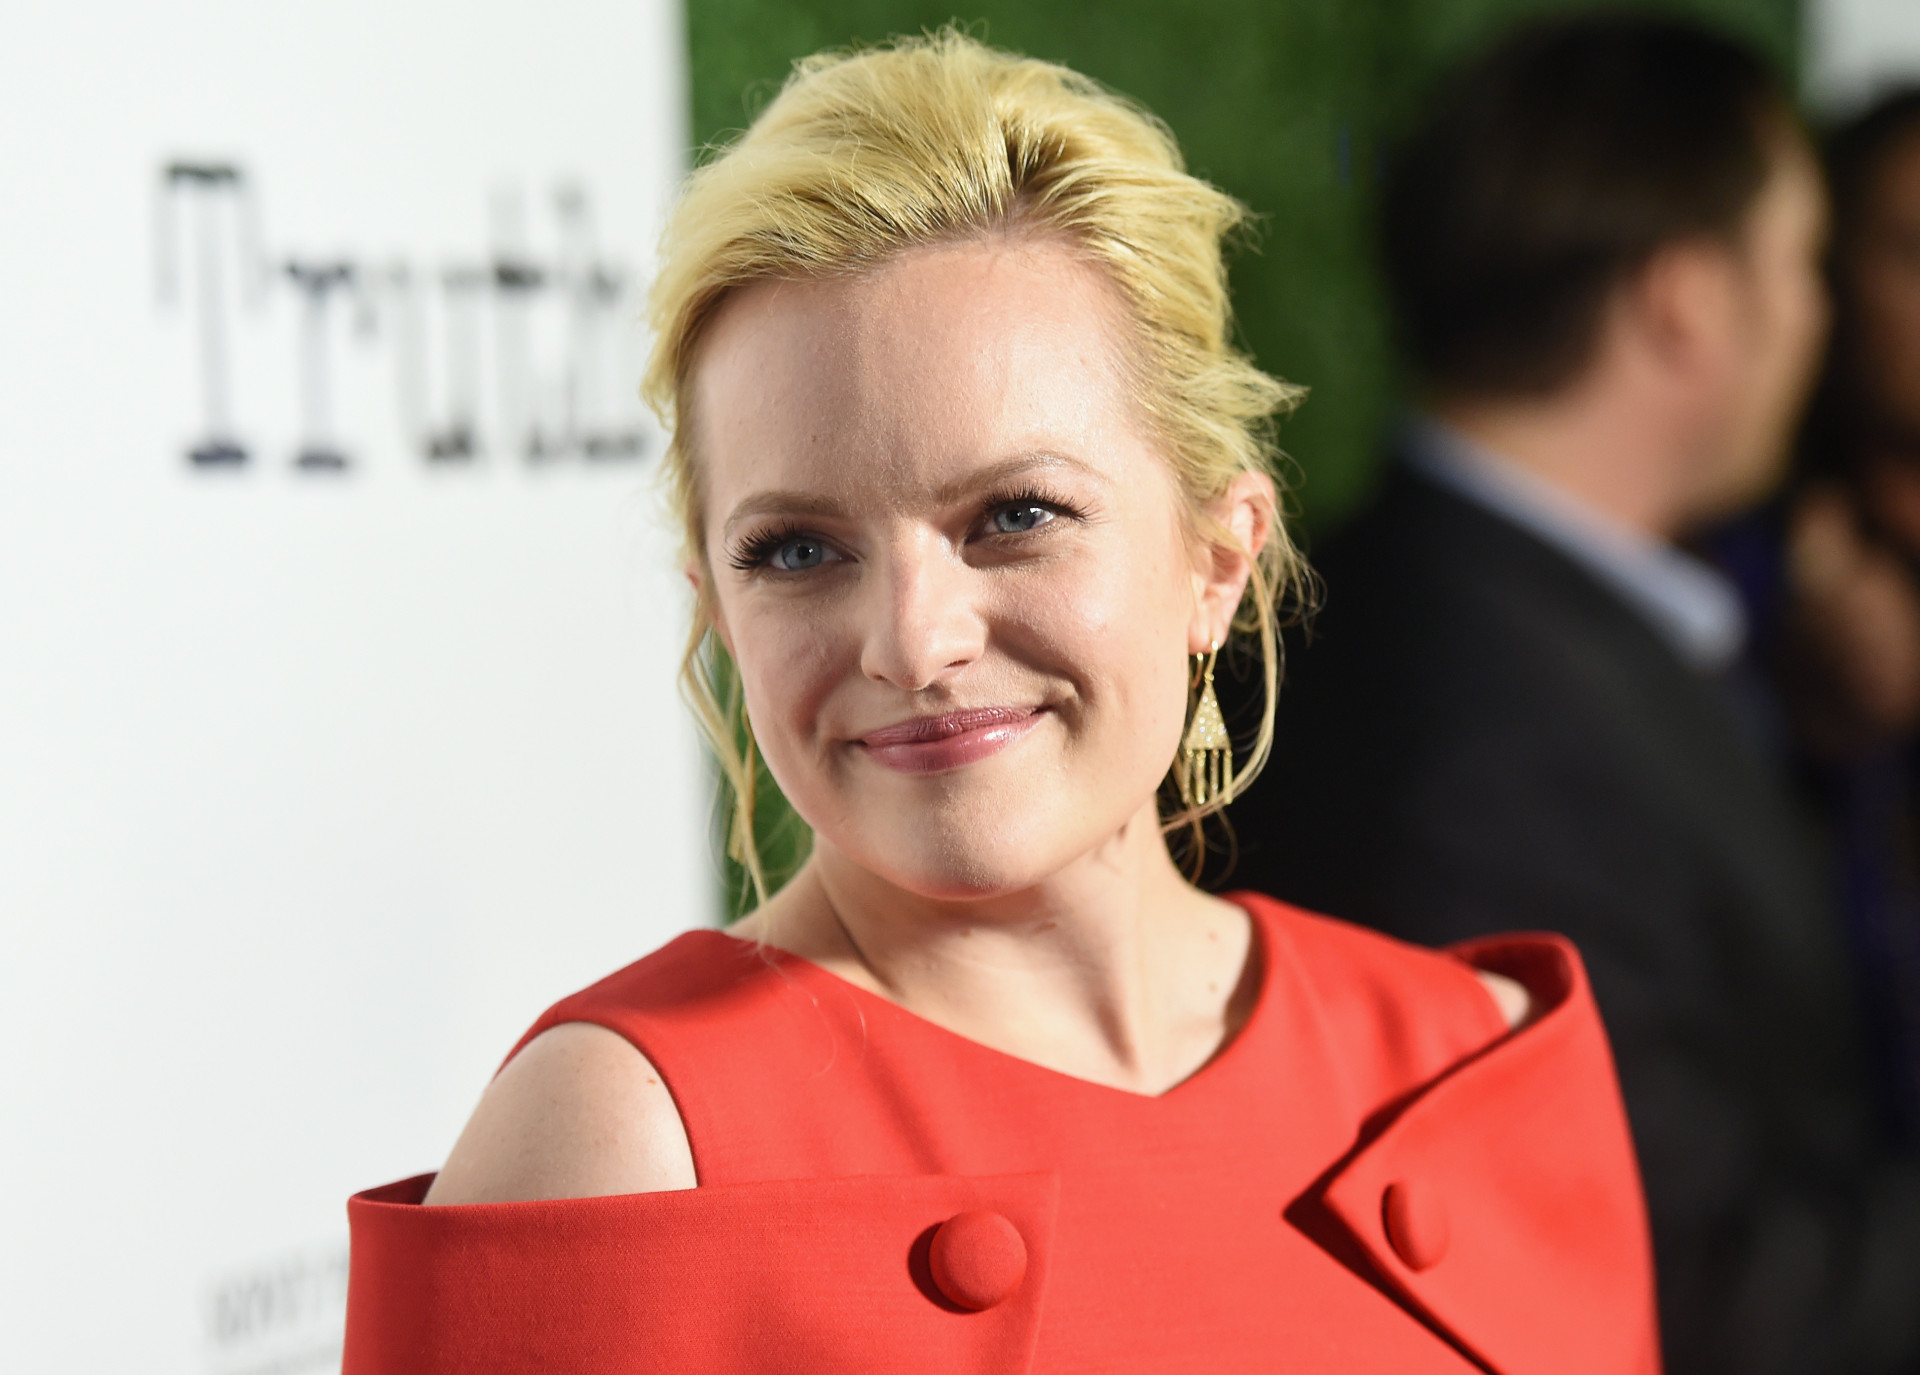 <p><span>The 'Handmaid’s Tale' actress was raised in the faith and continues to practice, though she rarely discusses it publicly. </span></p><p><a href="https://www.msn.com/en-us/community/channel/vid-7xx8mnucu55yw63we9va2gwr7uihbxwc68fxqp25x6tg4ftibpra?cvid=94631541bc0f4f89bfd59158d696ad7e">Follow us and access great exclusive content every day</a></p>